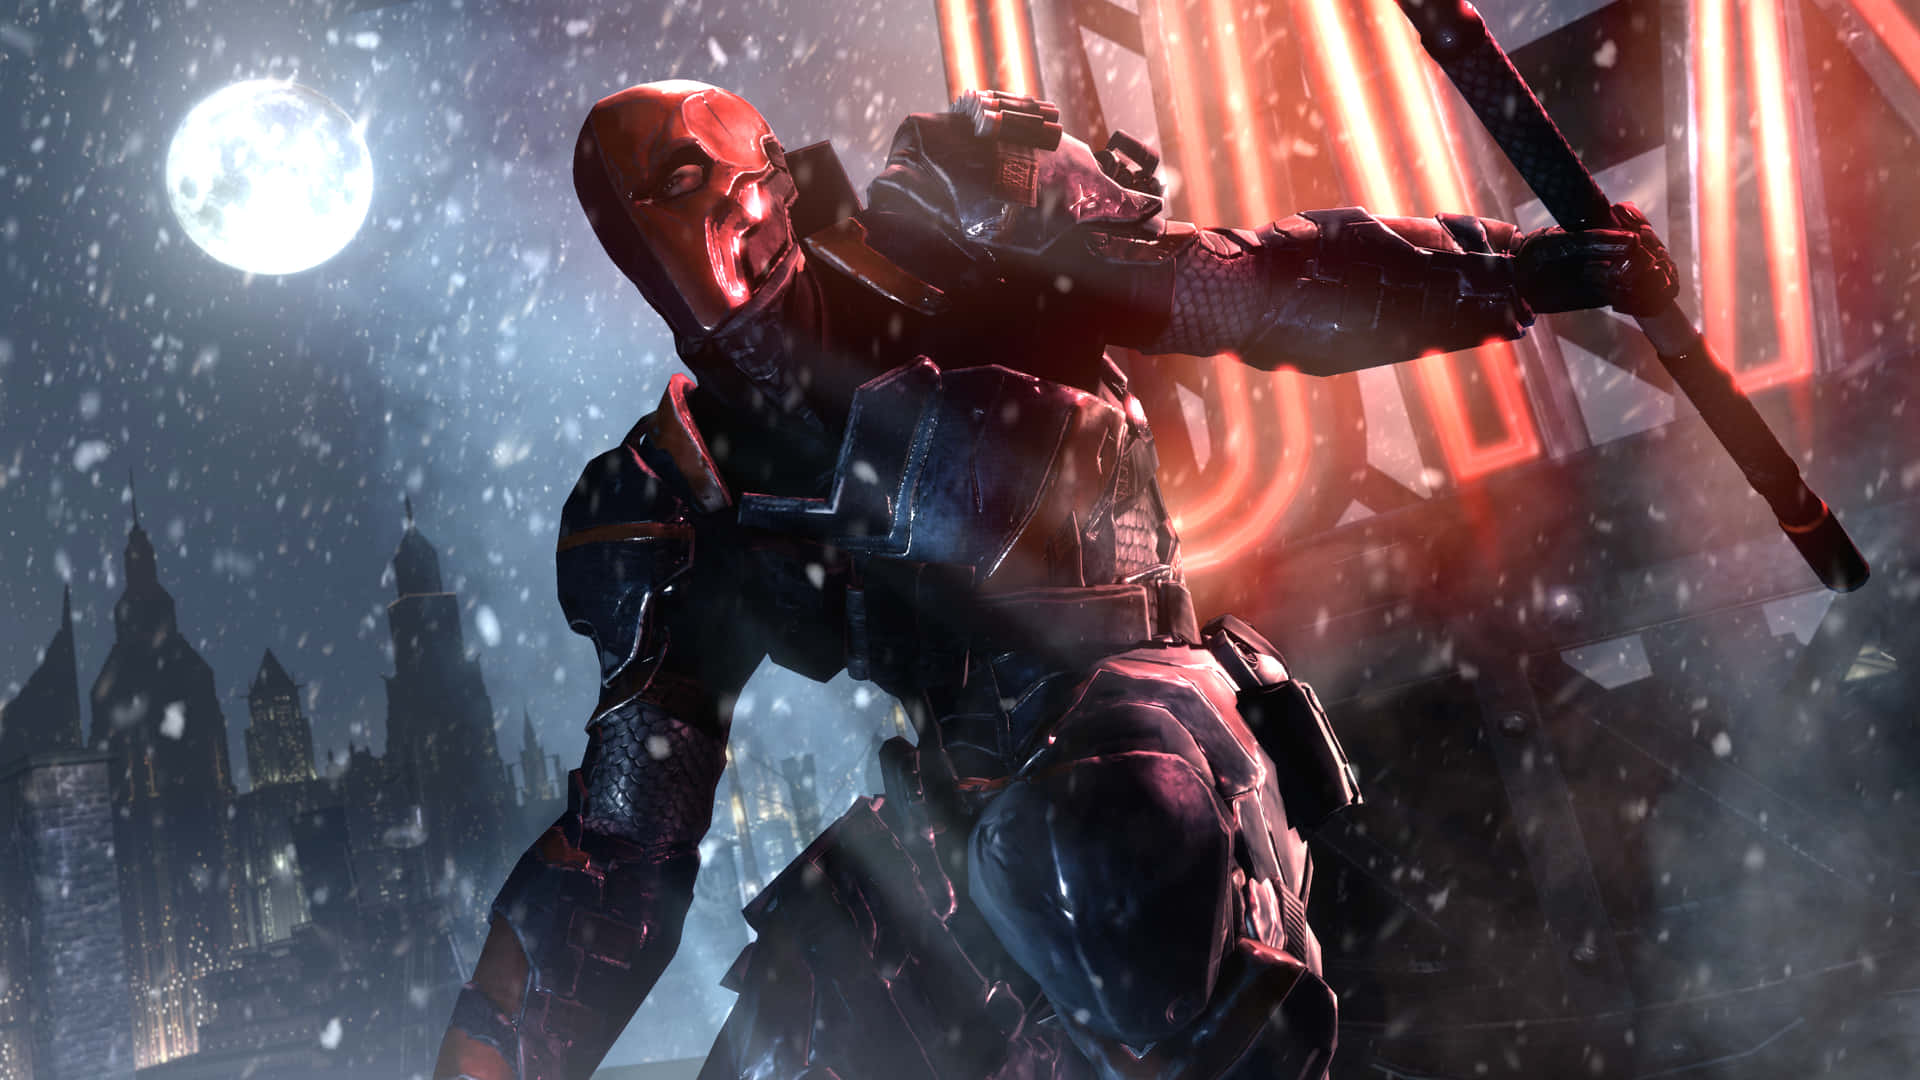 Get Ready to Strike Fear with Deathstroke